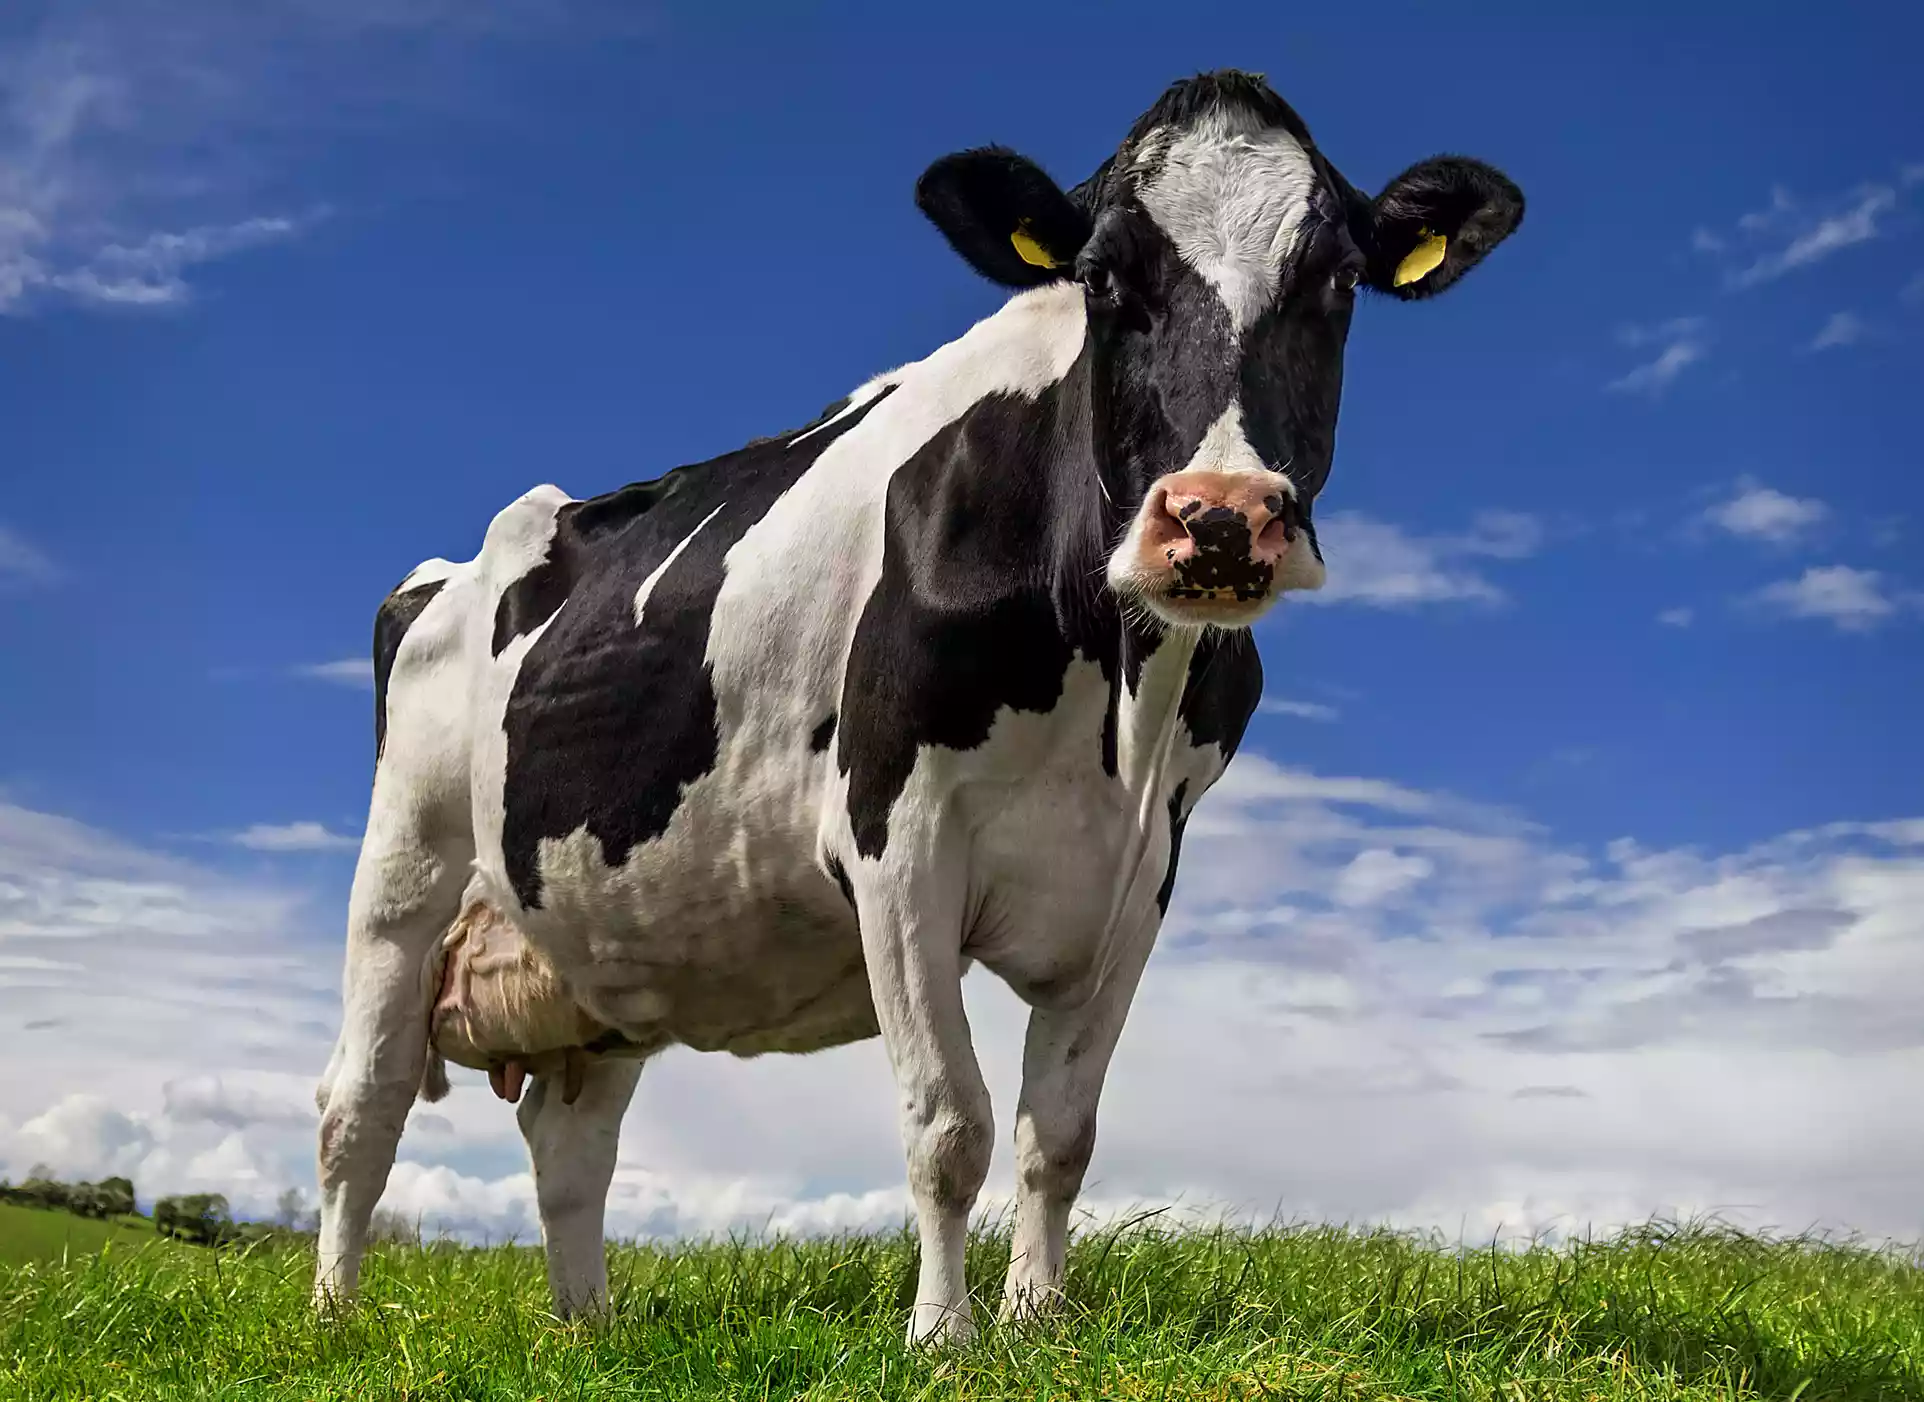 A black and white cow looking down from a green pasture with a bright blue sky.